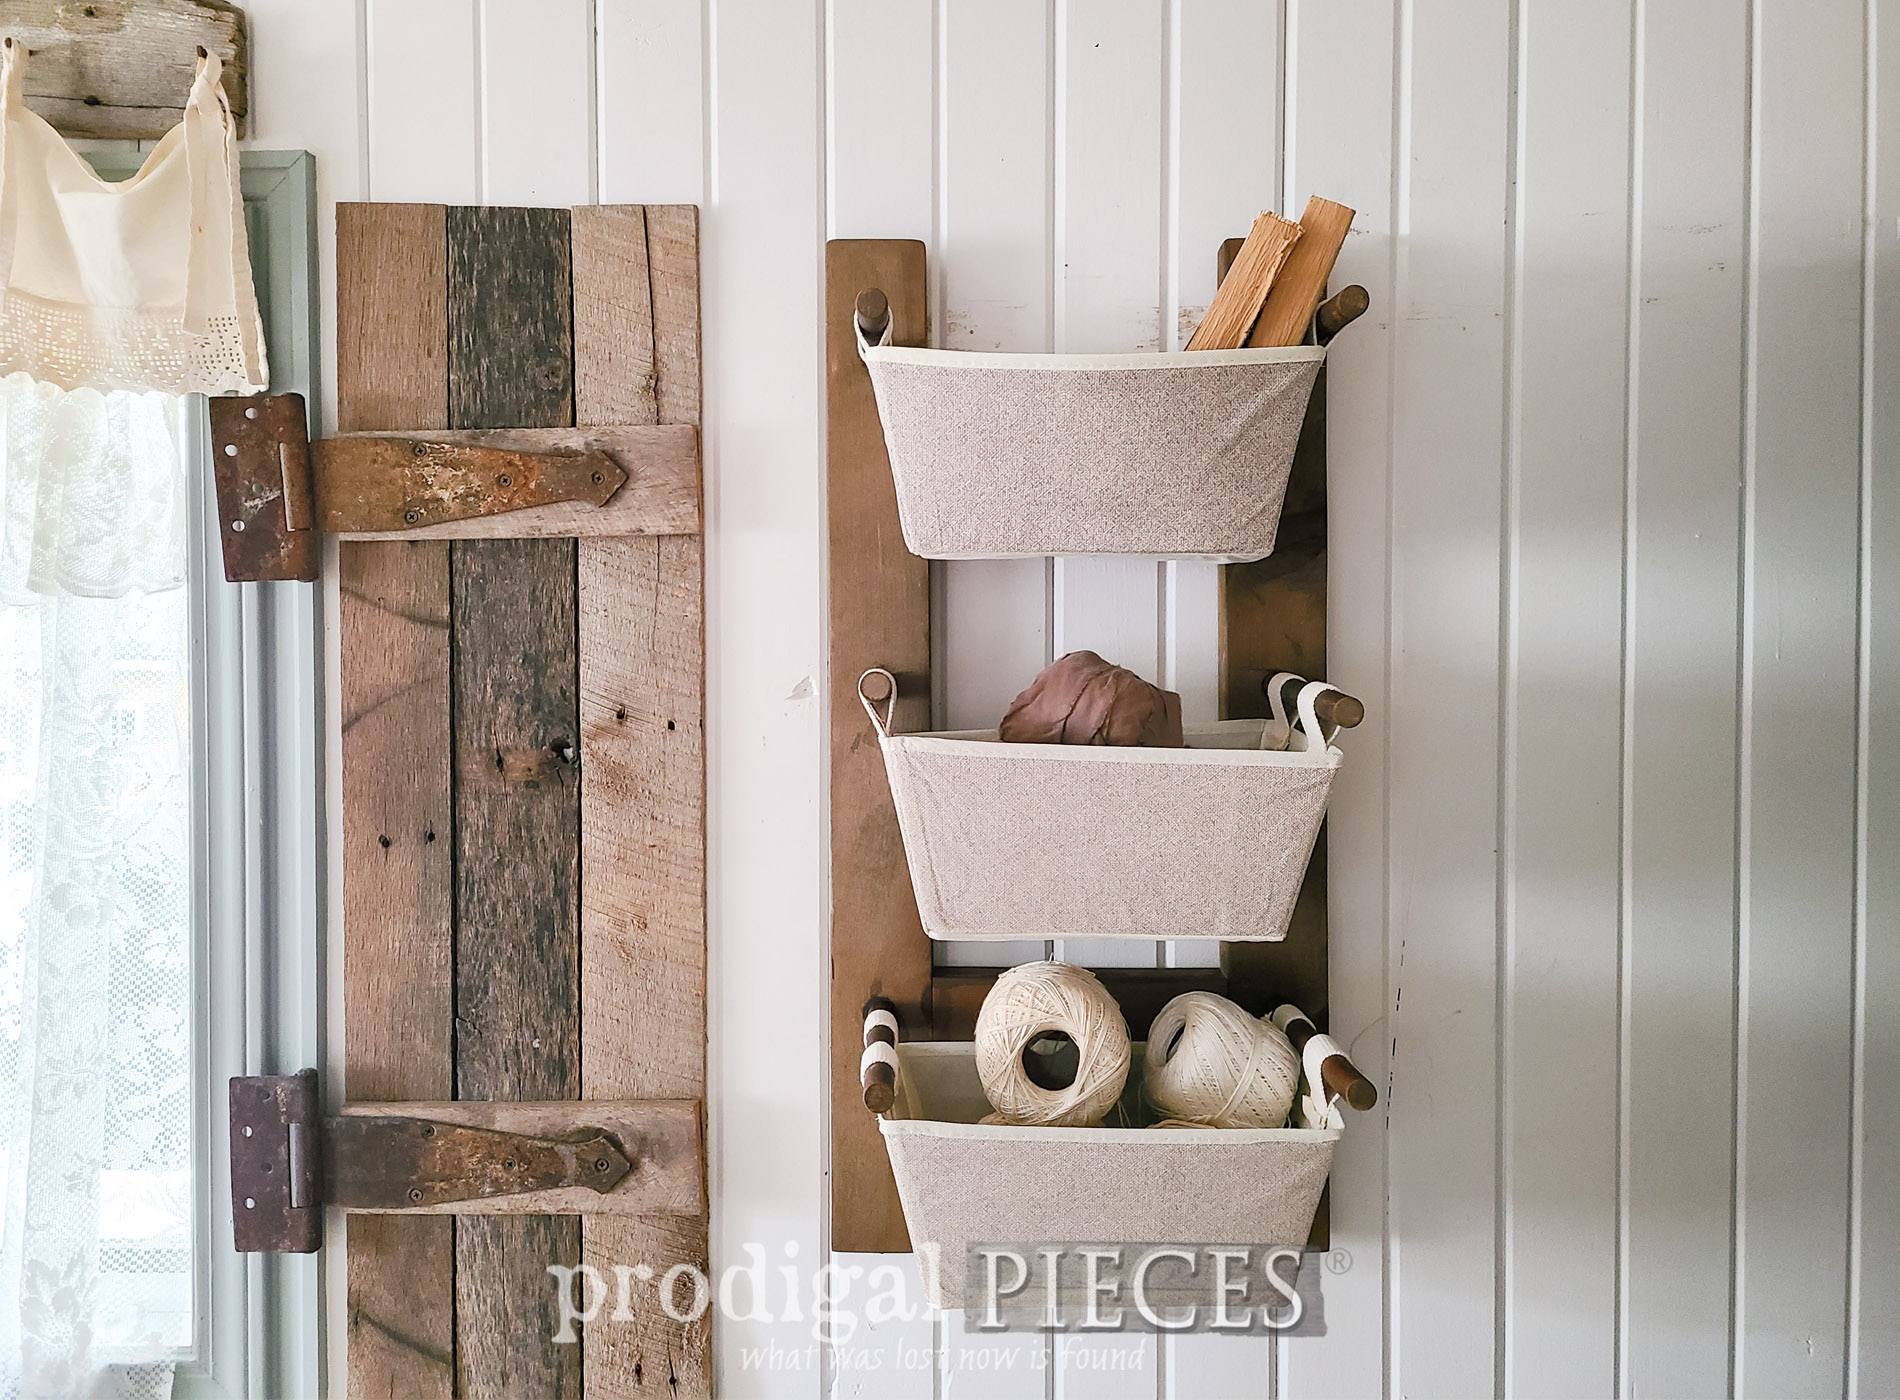 Featured Upcycled Spindle Storage Rack DIY Tutorial with Build Plans by Larissa of Prodigal Pieces | prodigalpieces.com #prodigalpieces #diy #free #farmhouse